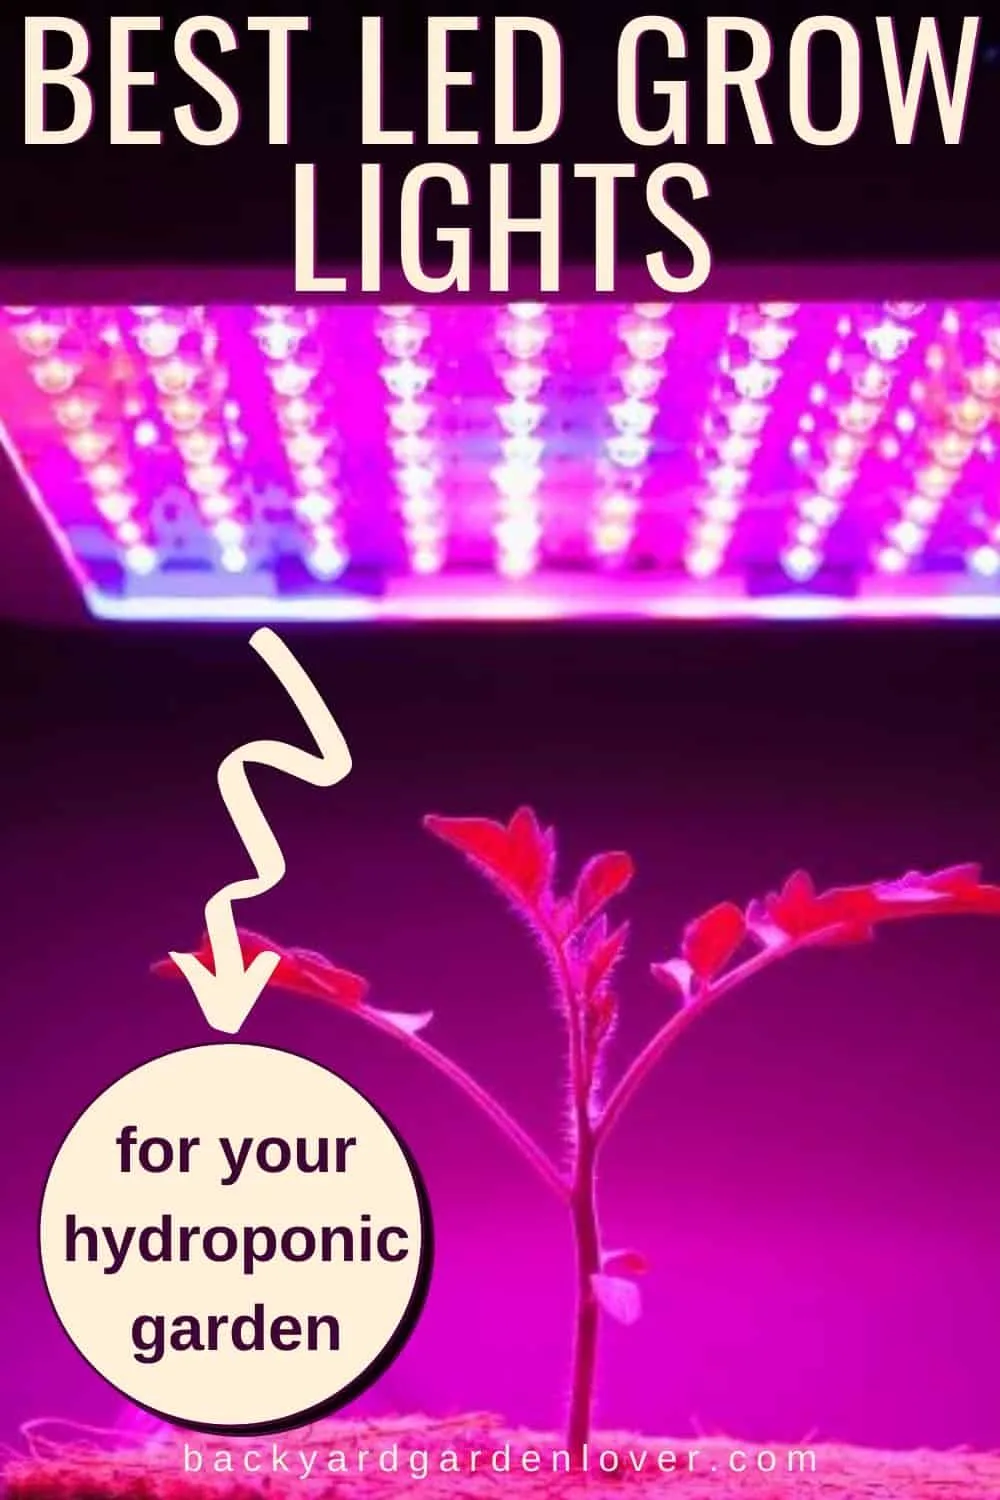 Best LED grow lights for your hydroponic garden